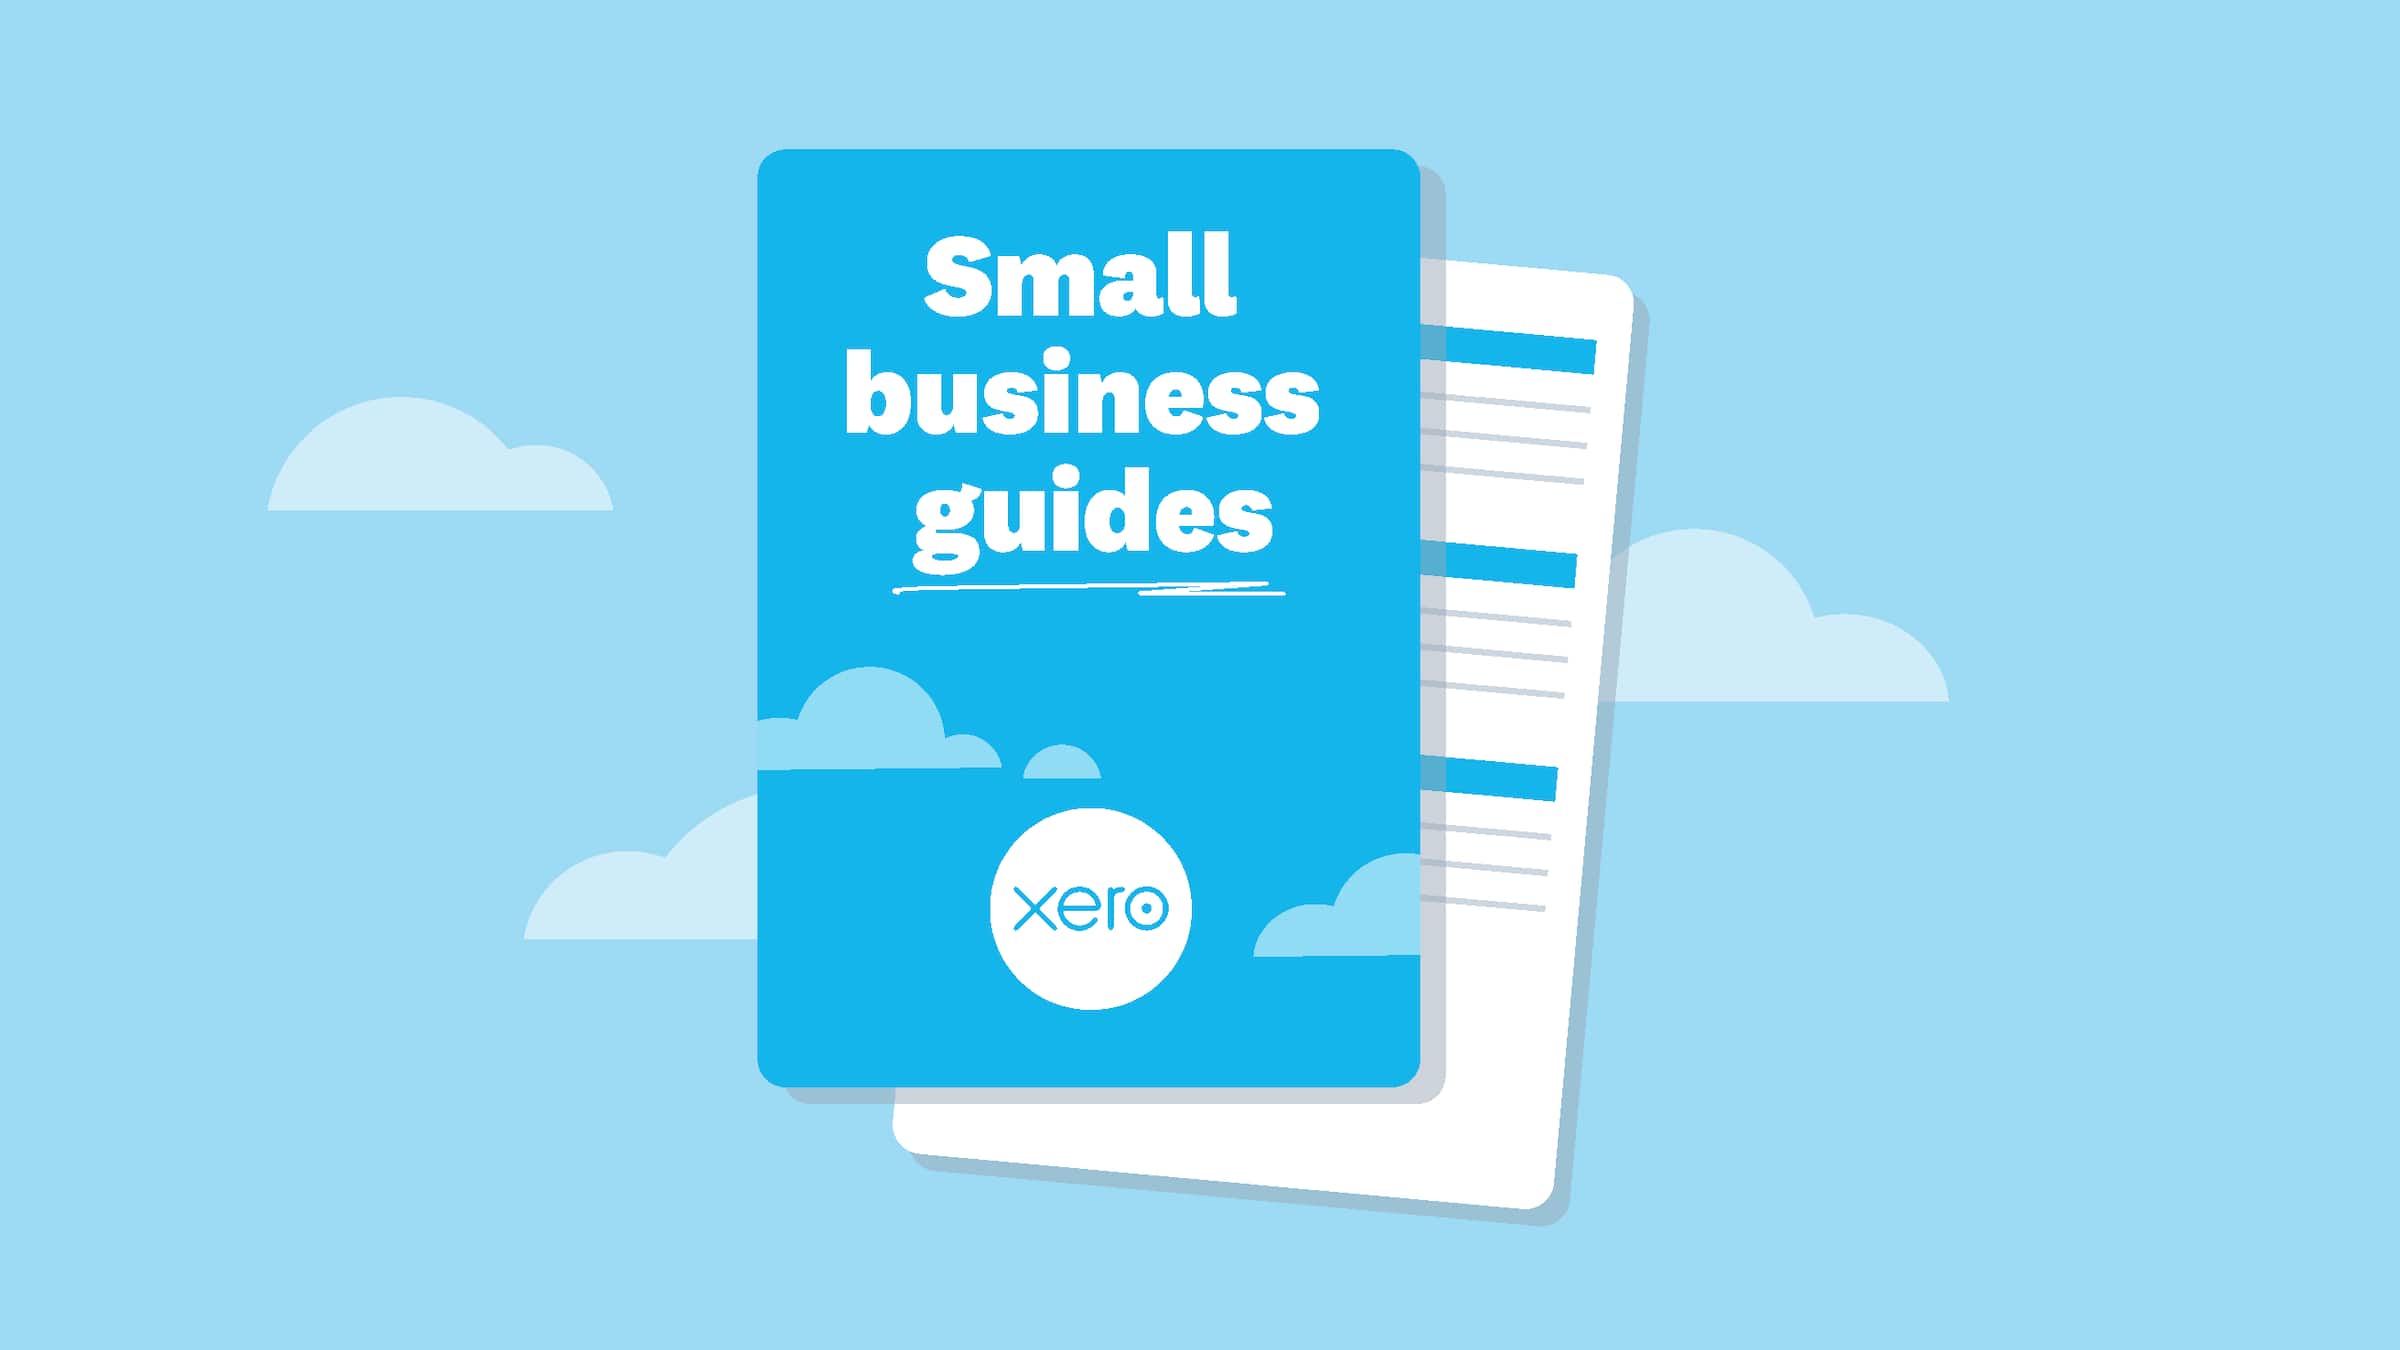 Papers labelled Small business guides